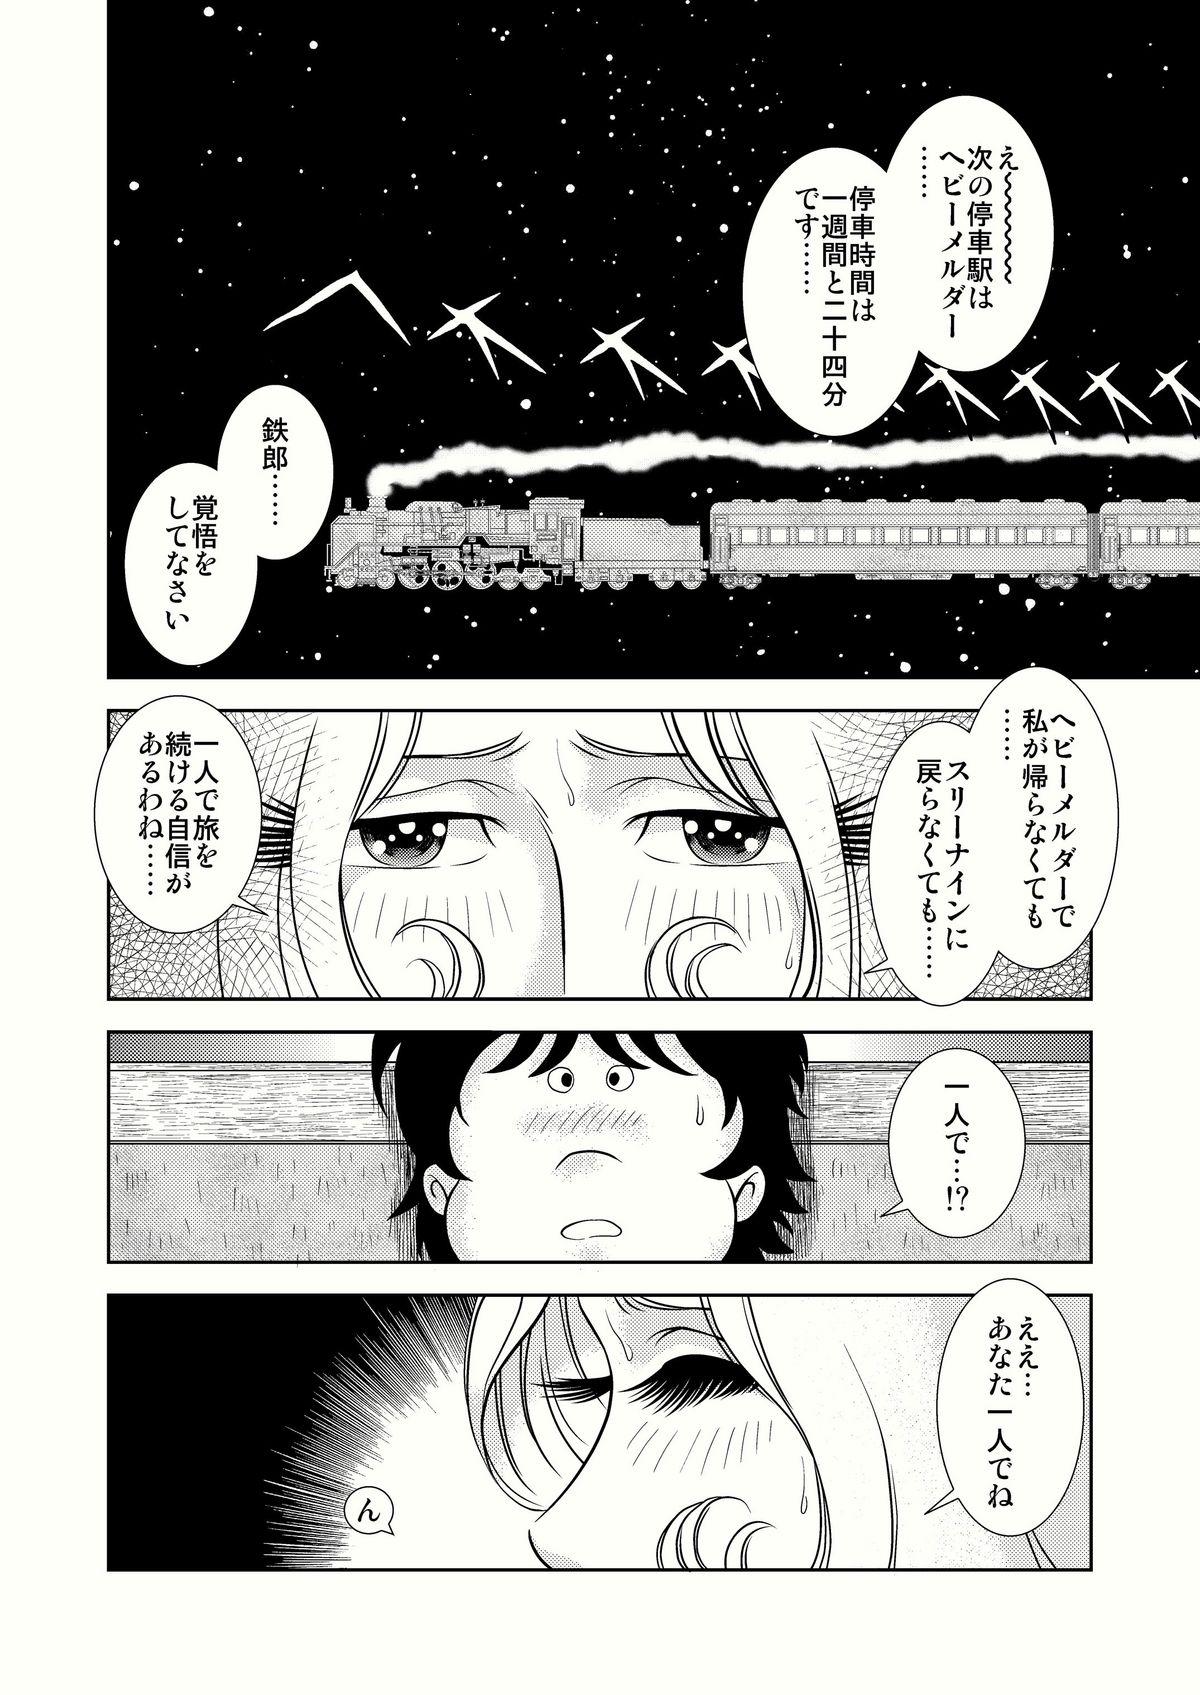 Ametuer Porn Maetel Story 4 - Galaxy express 999 Gay Pissing - Page 2